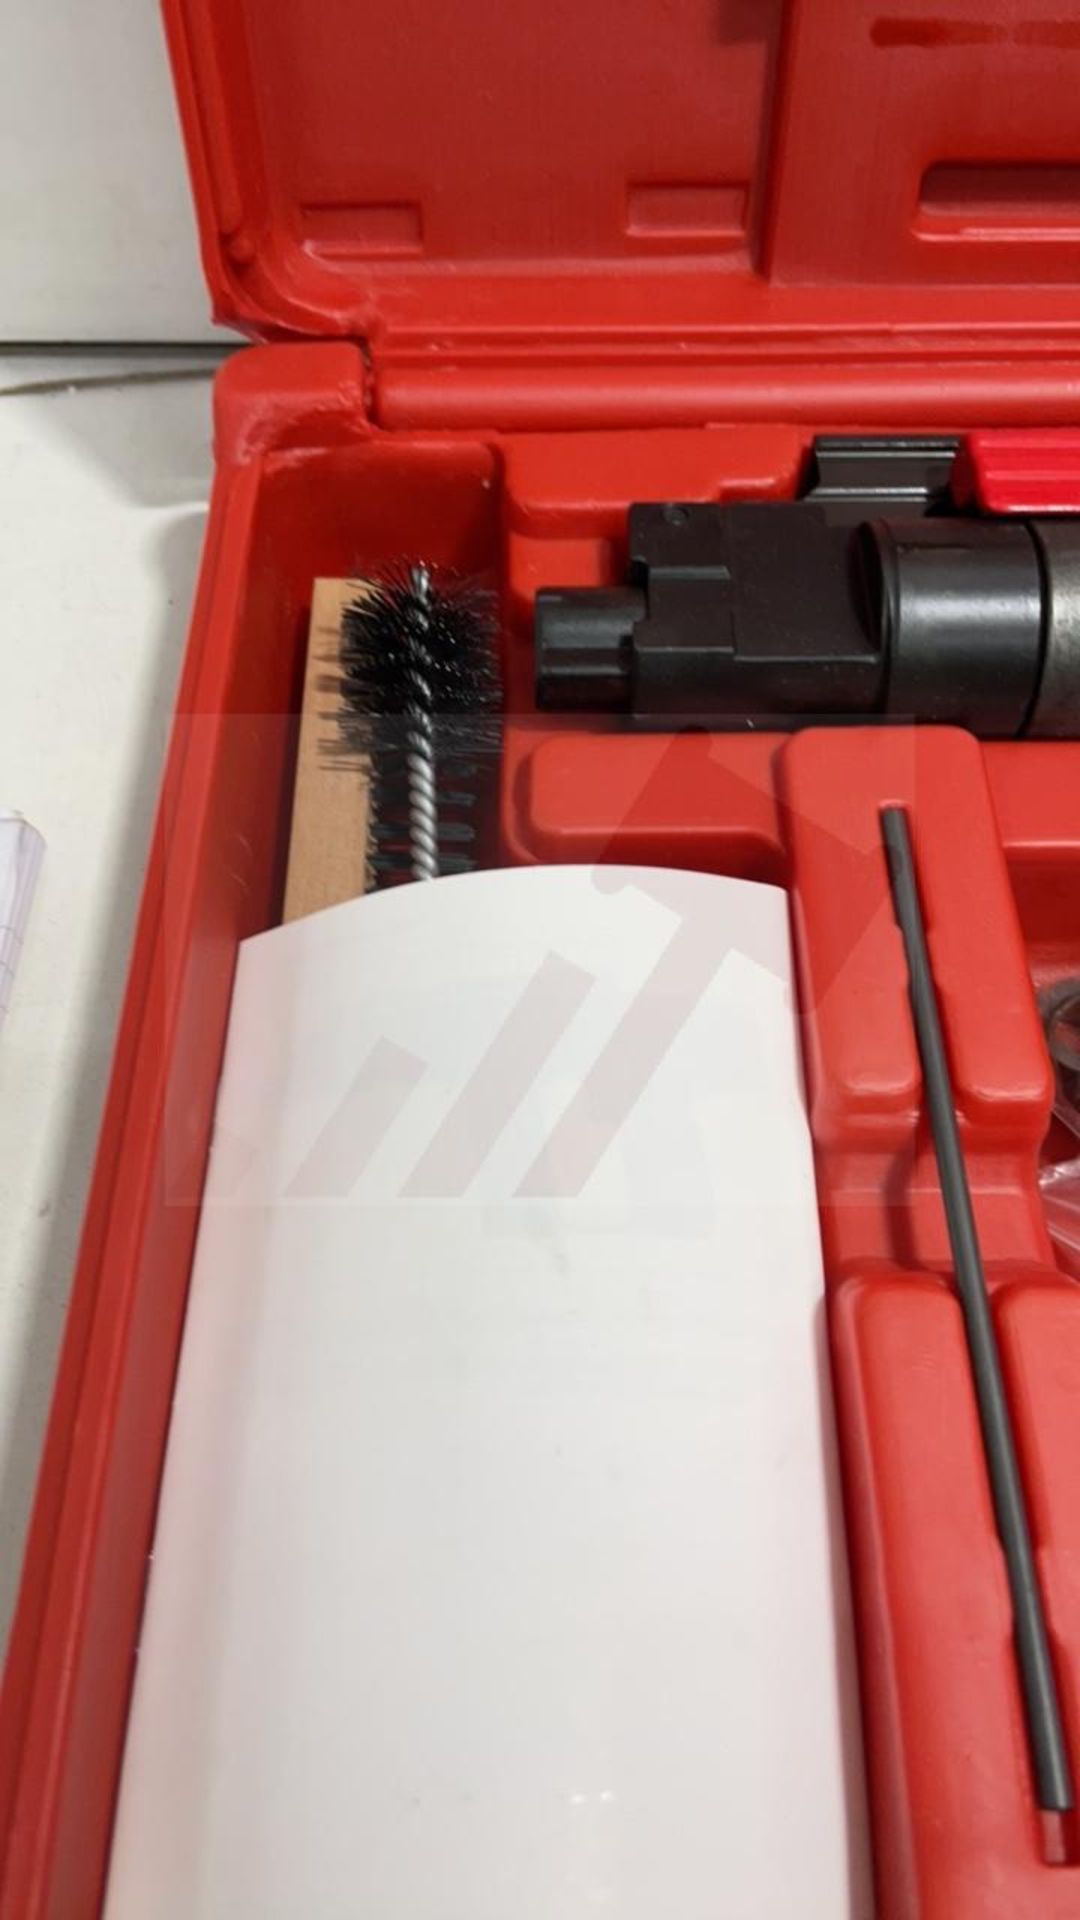 D450 fastening tool w/case - Image 2 of 5